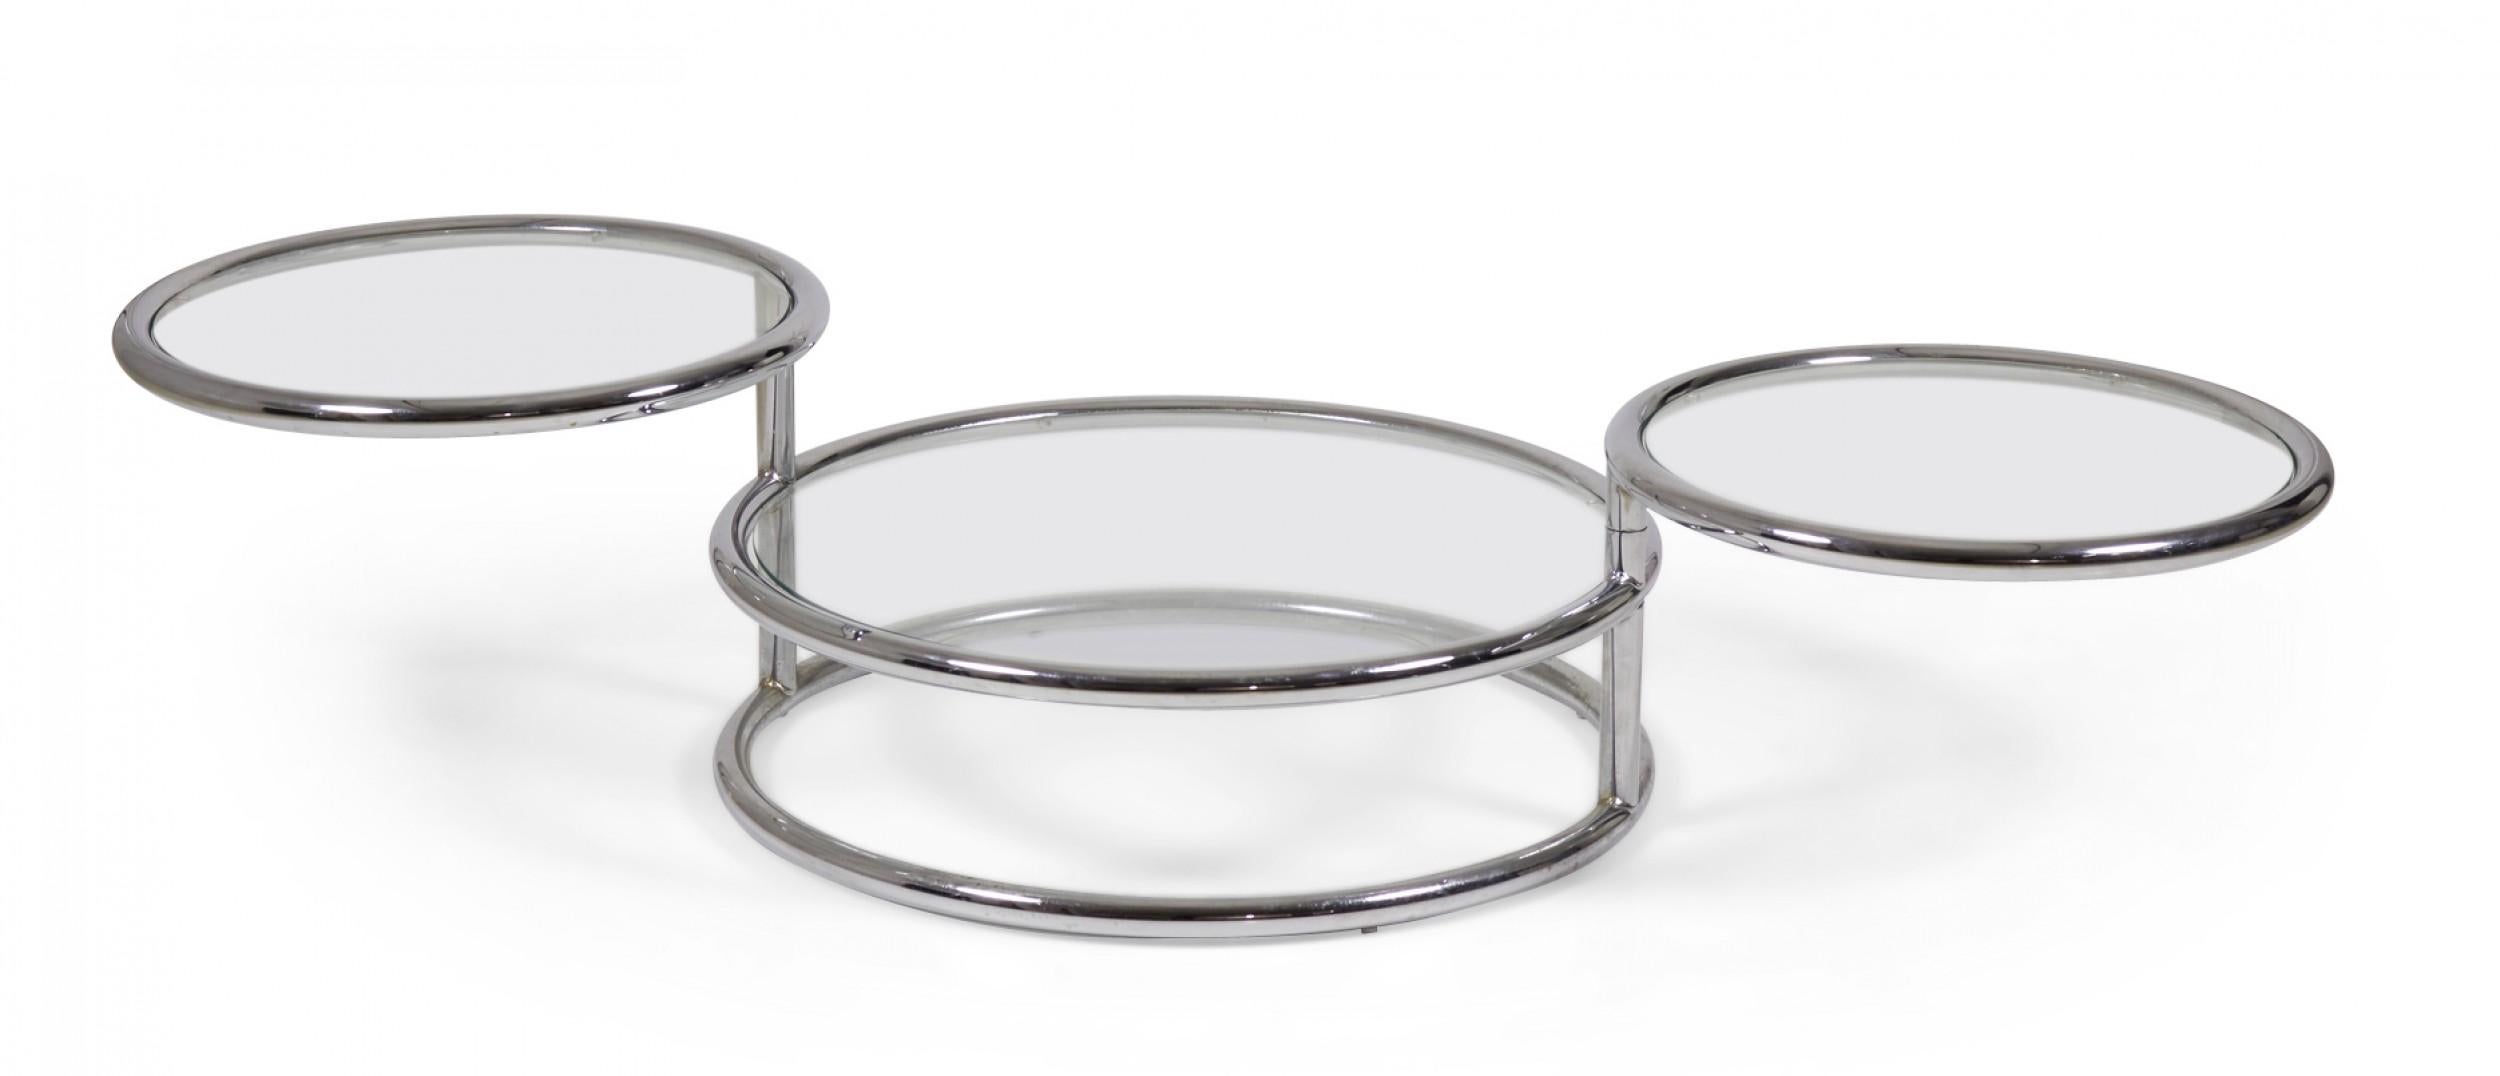 Pair of Morex Italian Mid-Century Space Age Swivel Chrome Cocktail Side Tables In Good Condition For Sale In New York, NY